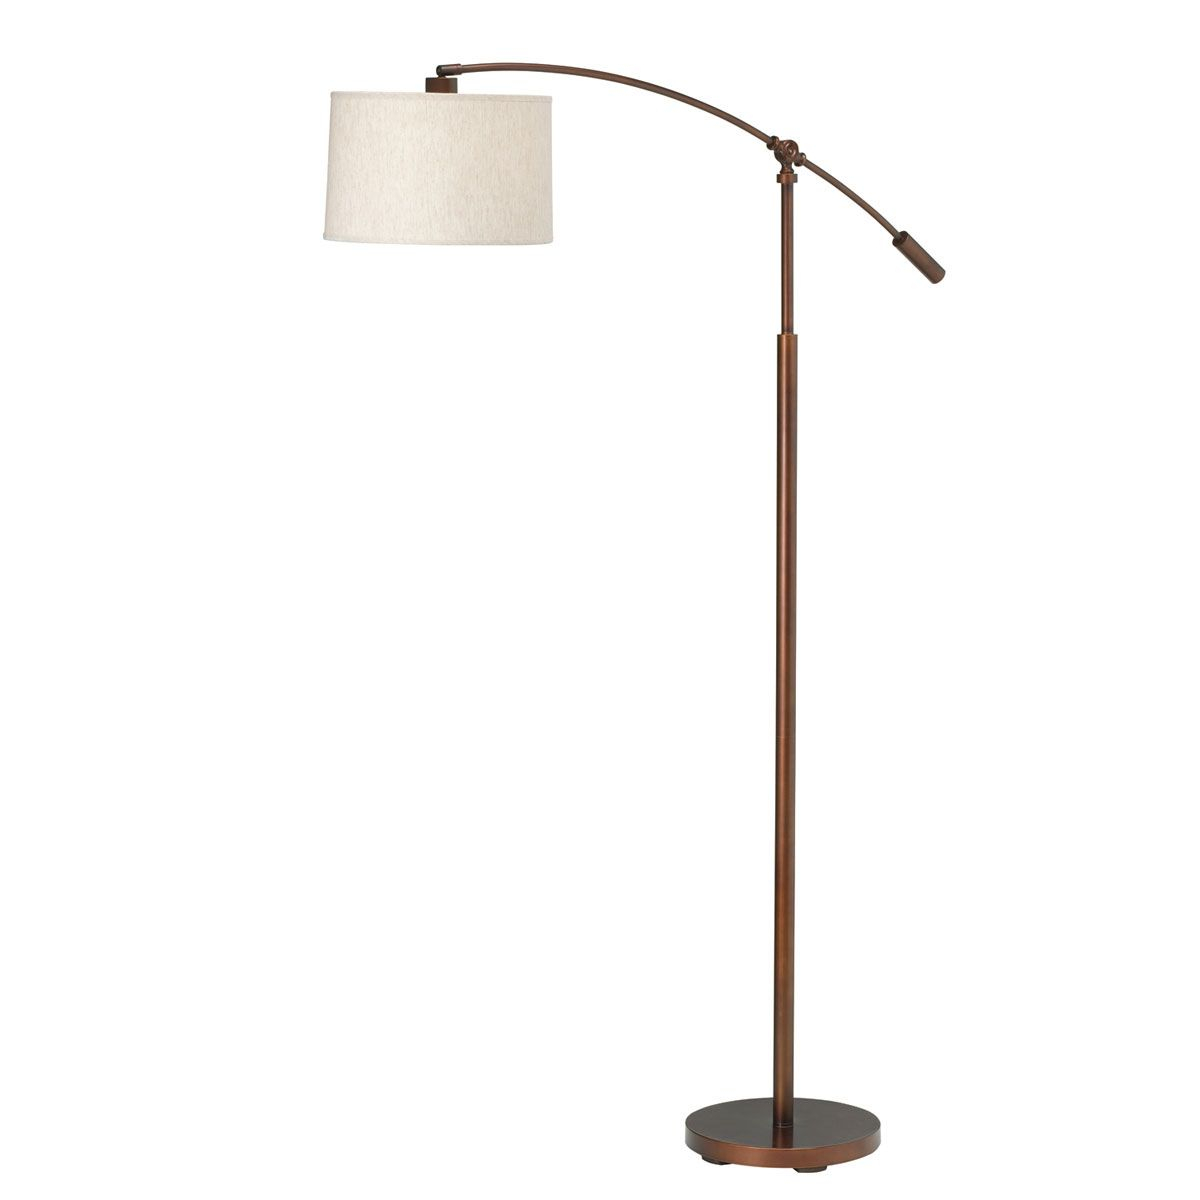 Kichler Westwood Collections 74256 Floor Lamp Bronze Floor intended for proportions 1200 X 1200